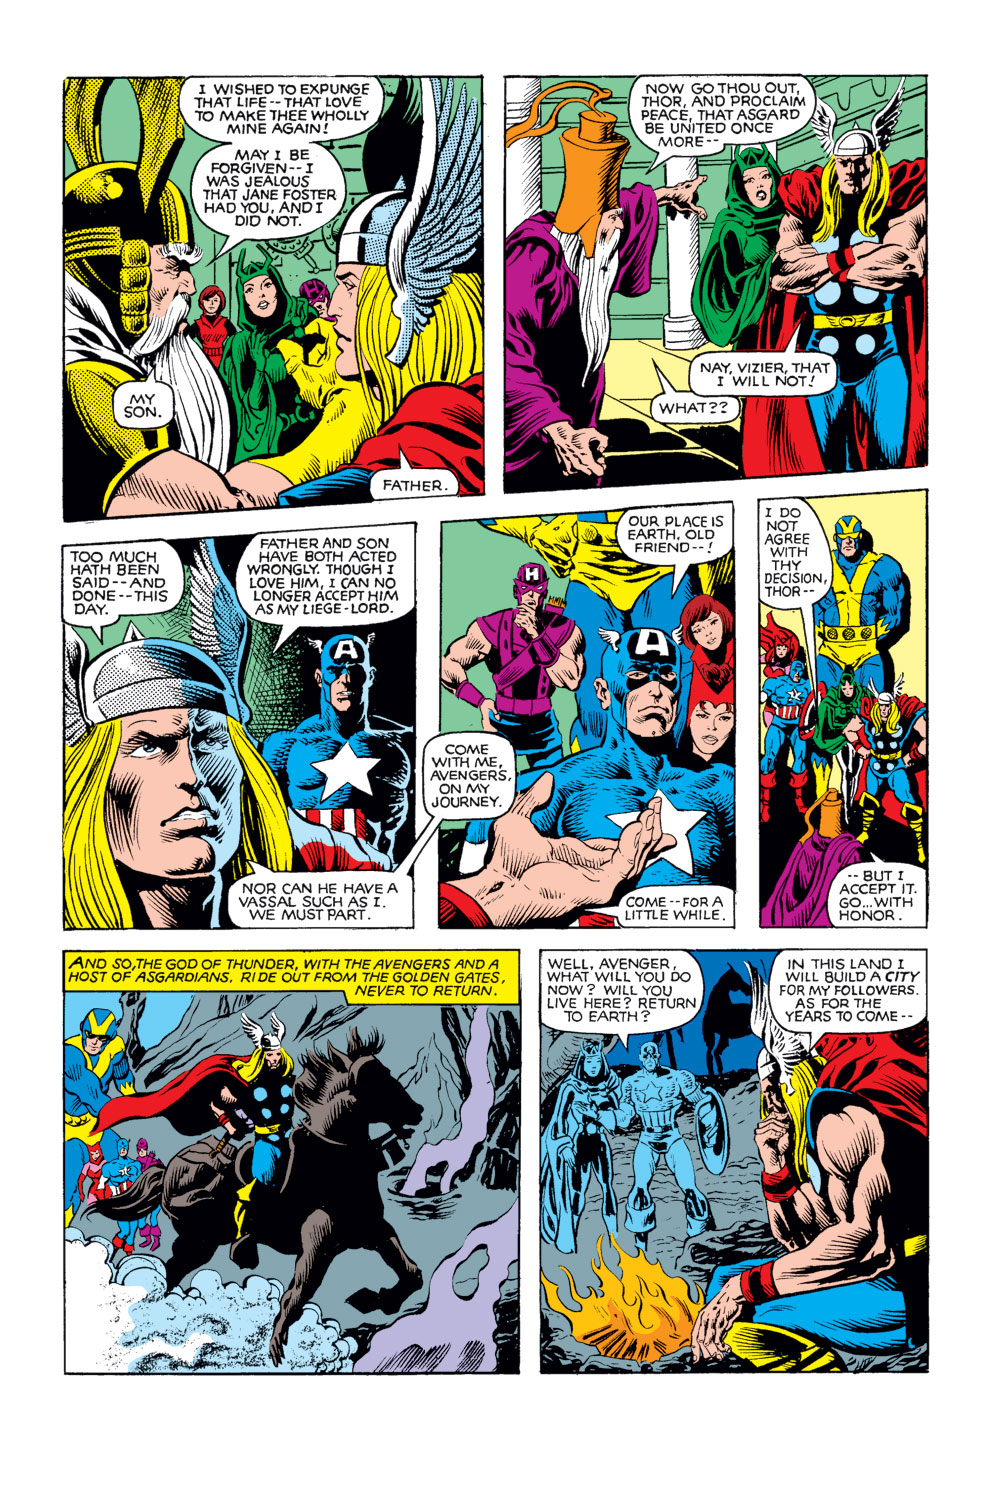 What If? (1977) issue 25 - Thor and the Avengers battled the gods - Page 32